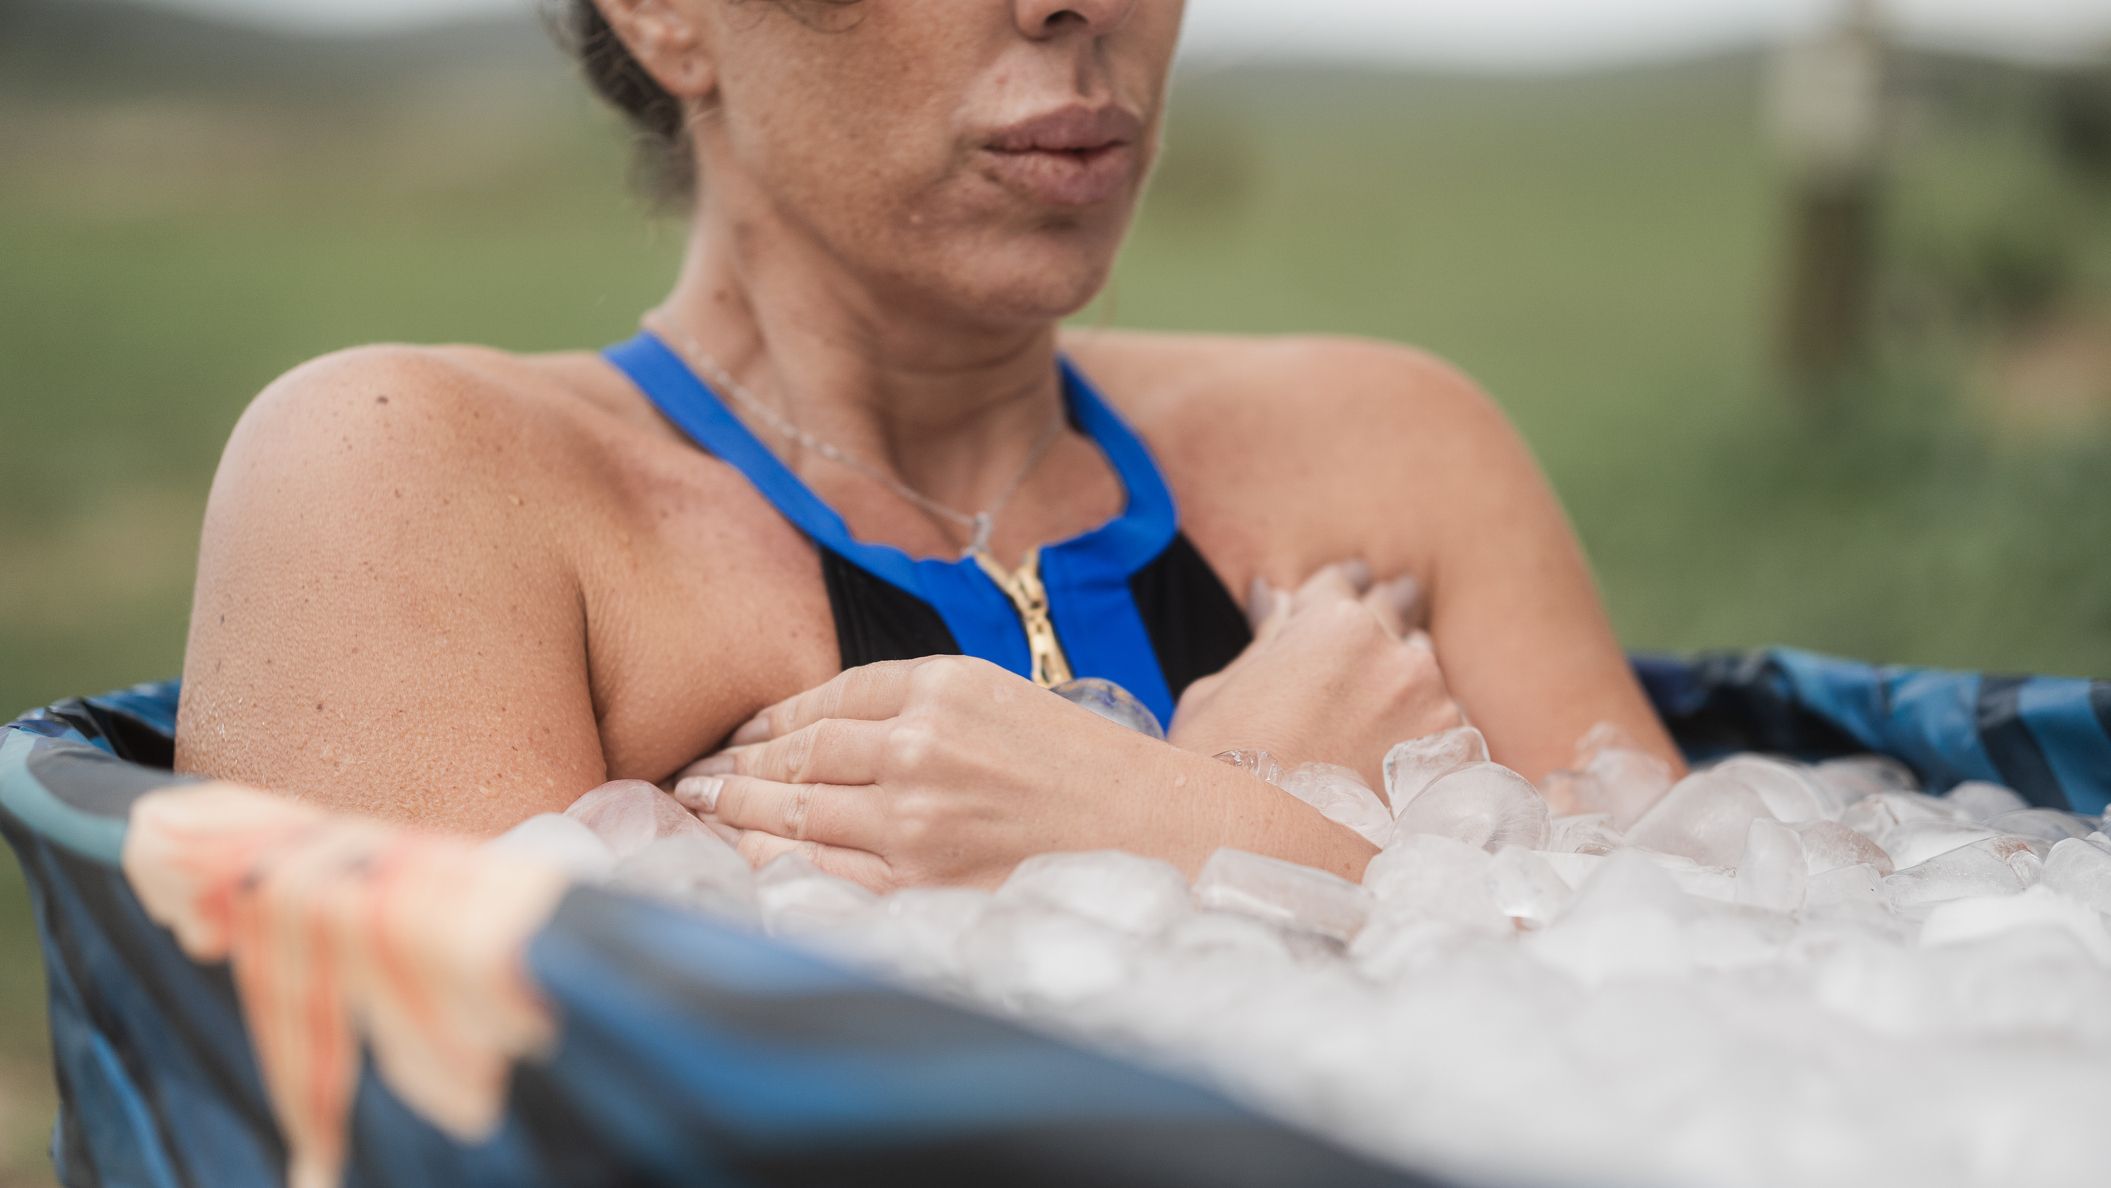 Ice Bath Benefits: Experts Share if It's Worth the Hype